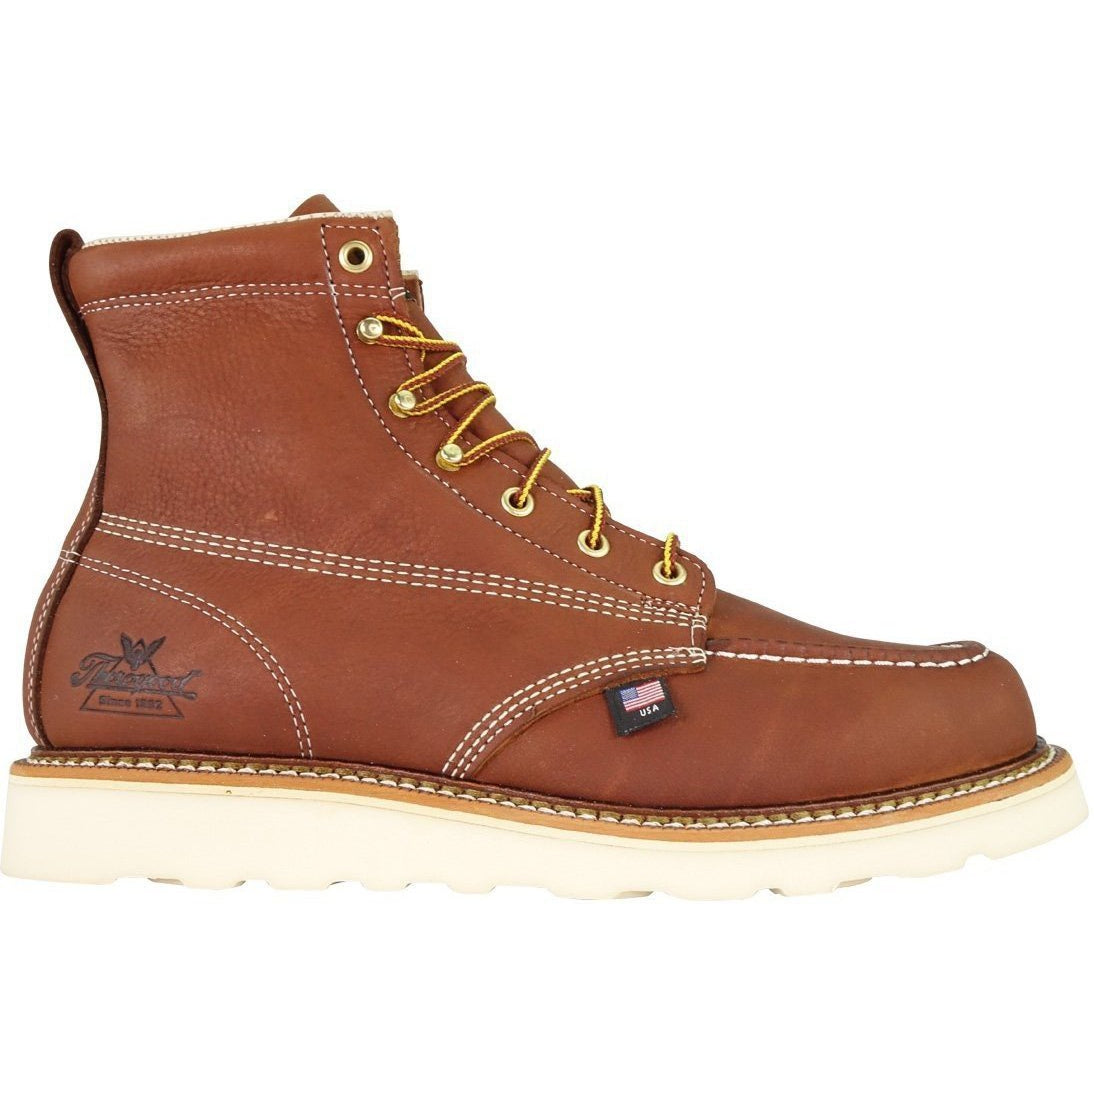 Thorogood Boots on Sale – Free Shipping 